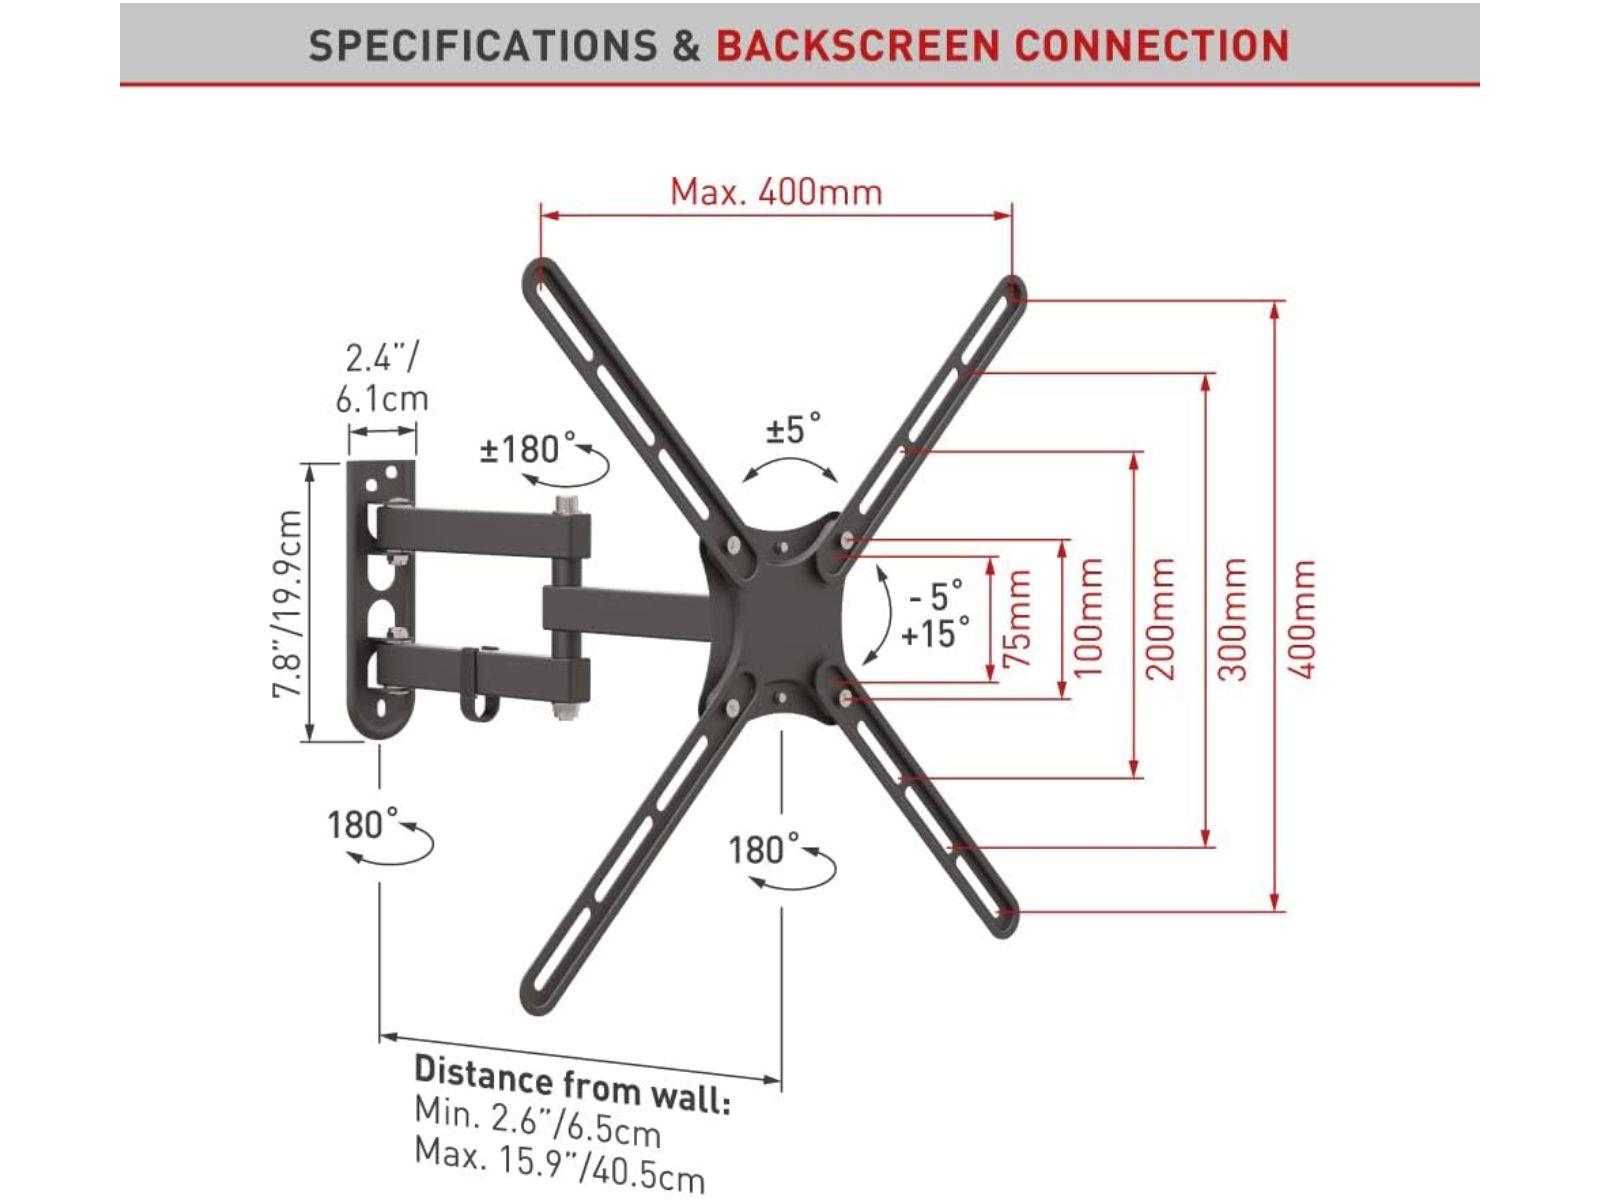 Measurement specifications for using the Dual Arm TV Wall Bracket (13-65" TVs)